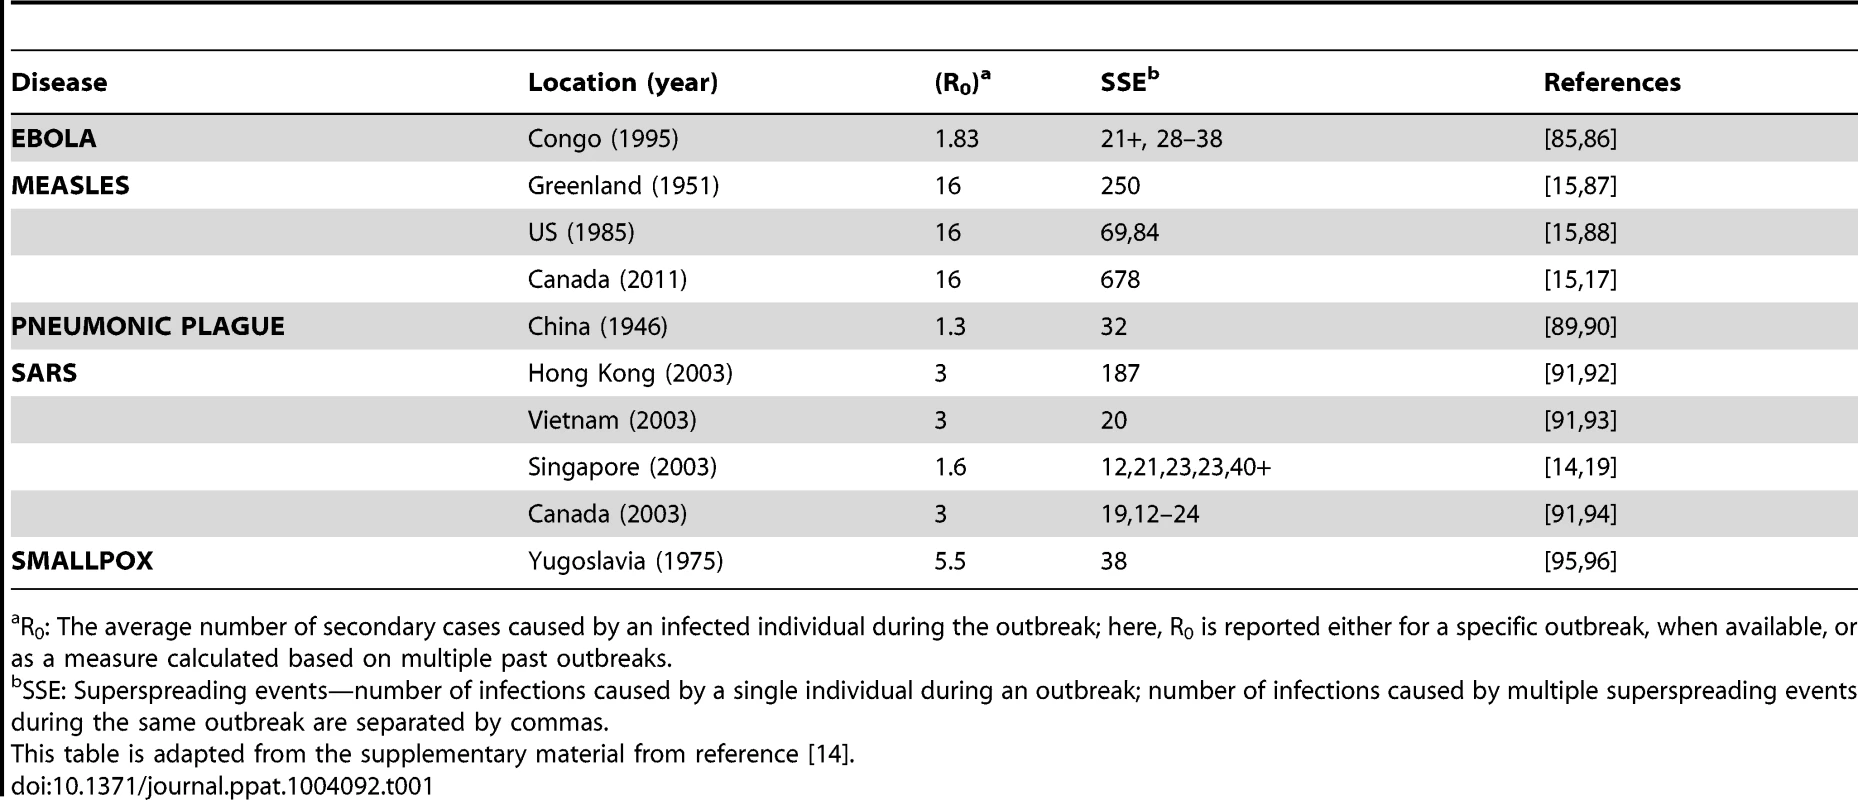 Superspreading events during infectious disease outbreaks.